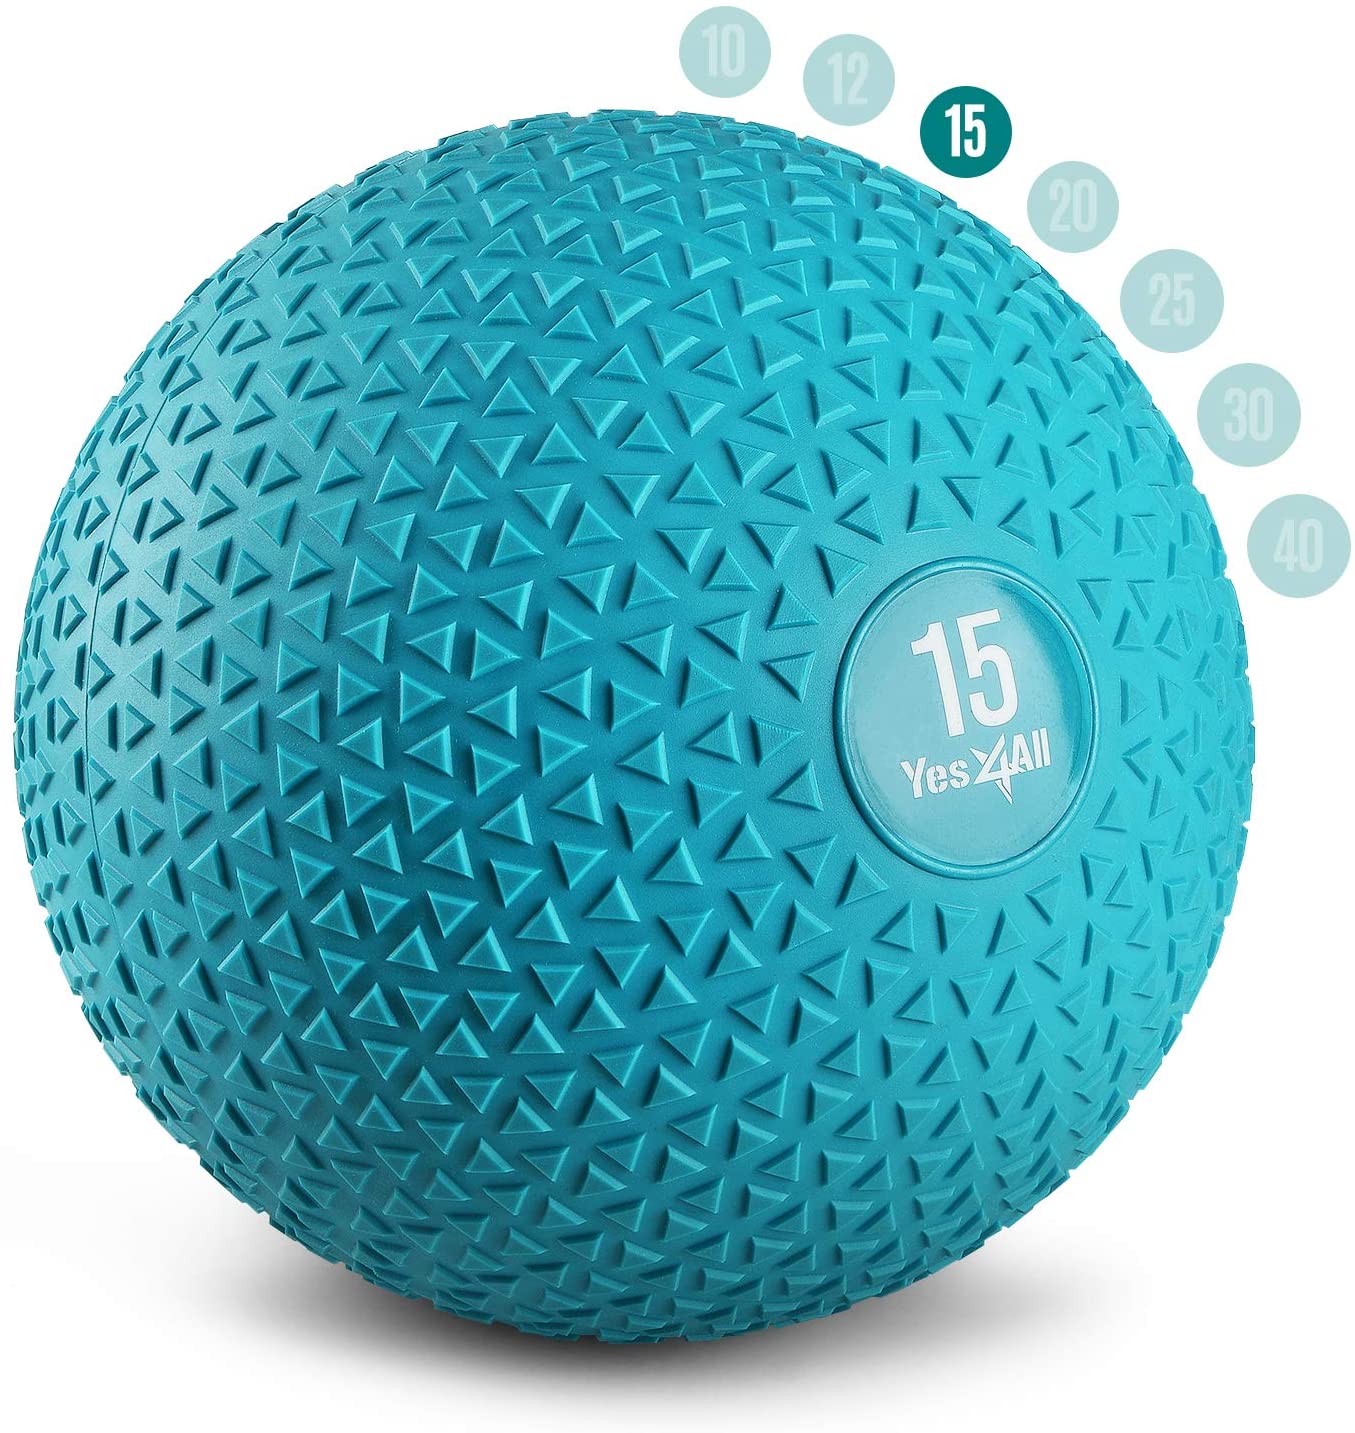 Yes4All 15lbs Slam Medicine Ball Triangle Teal - image 1 of 8